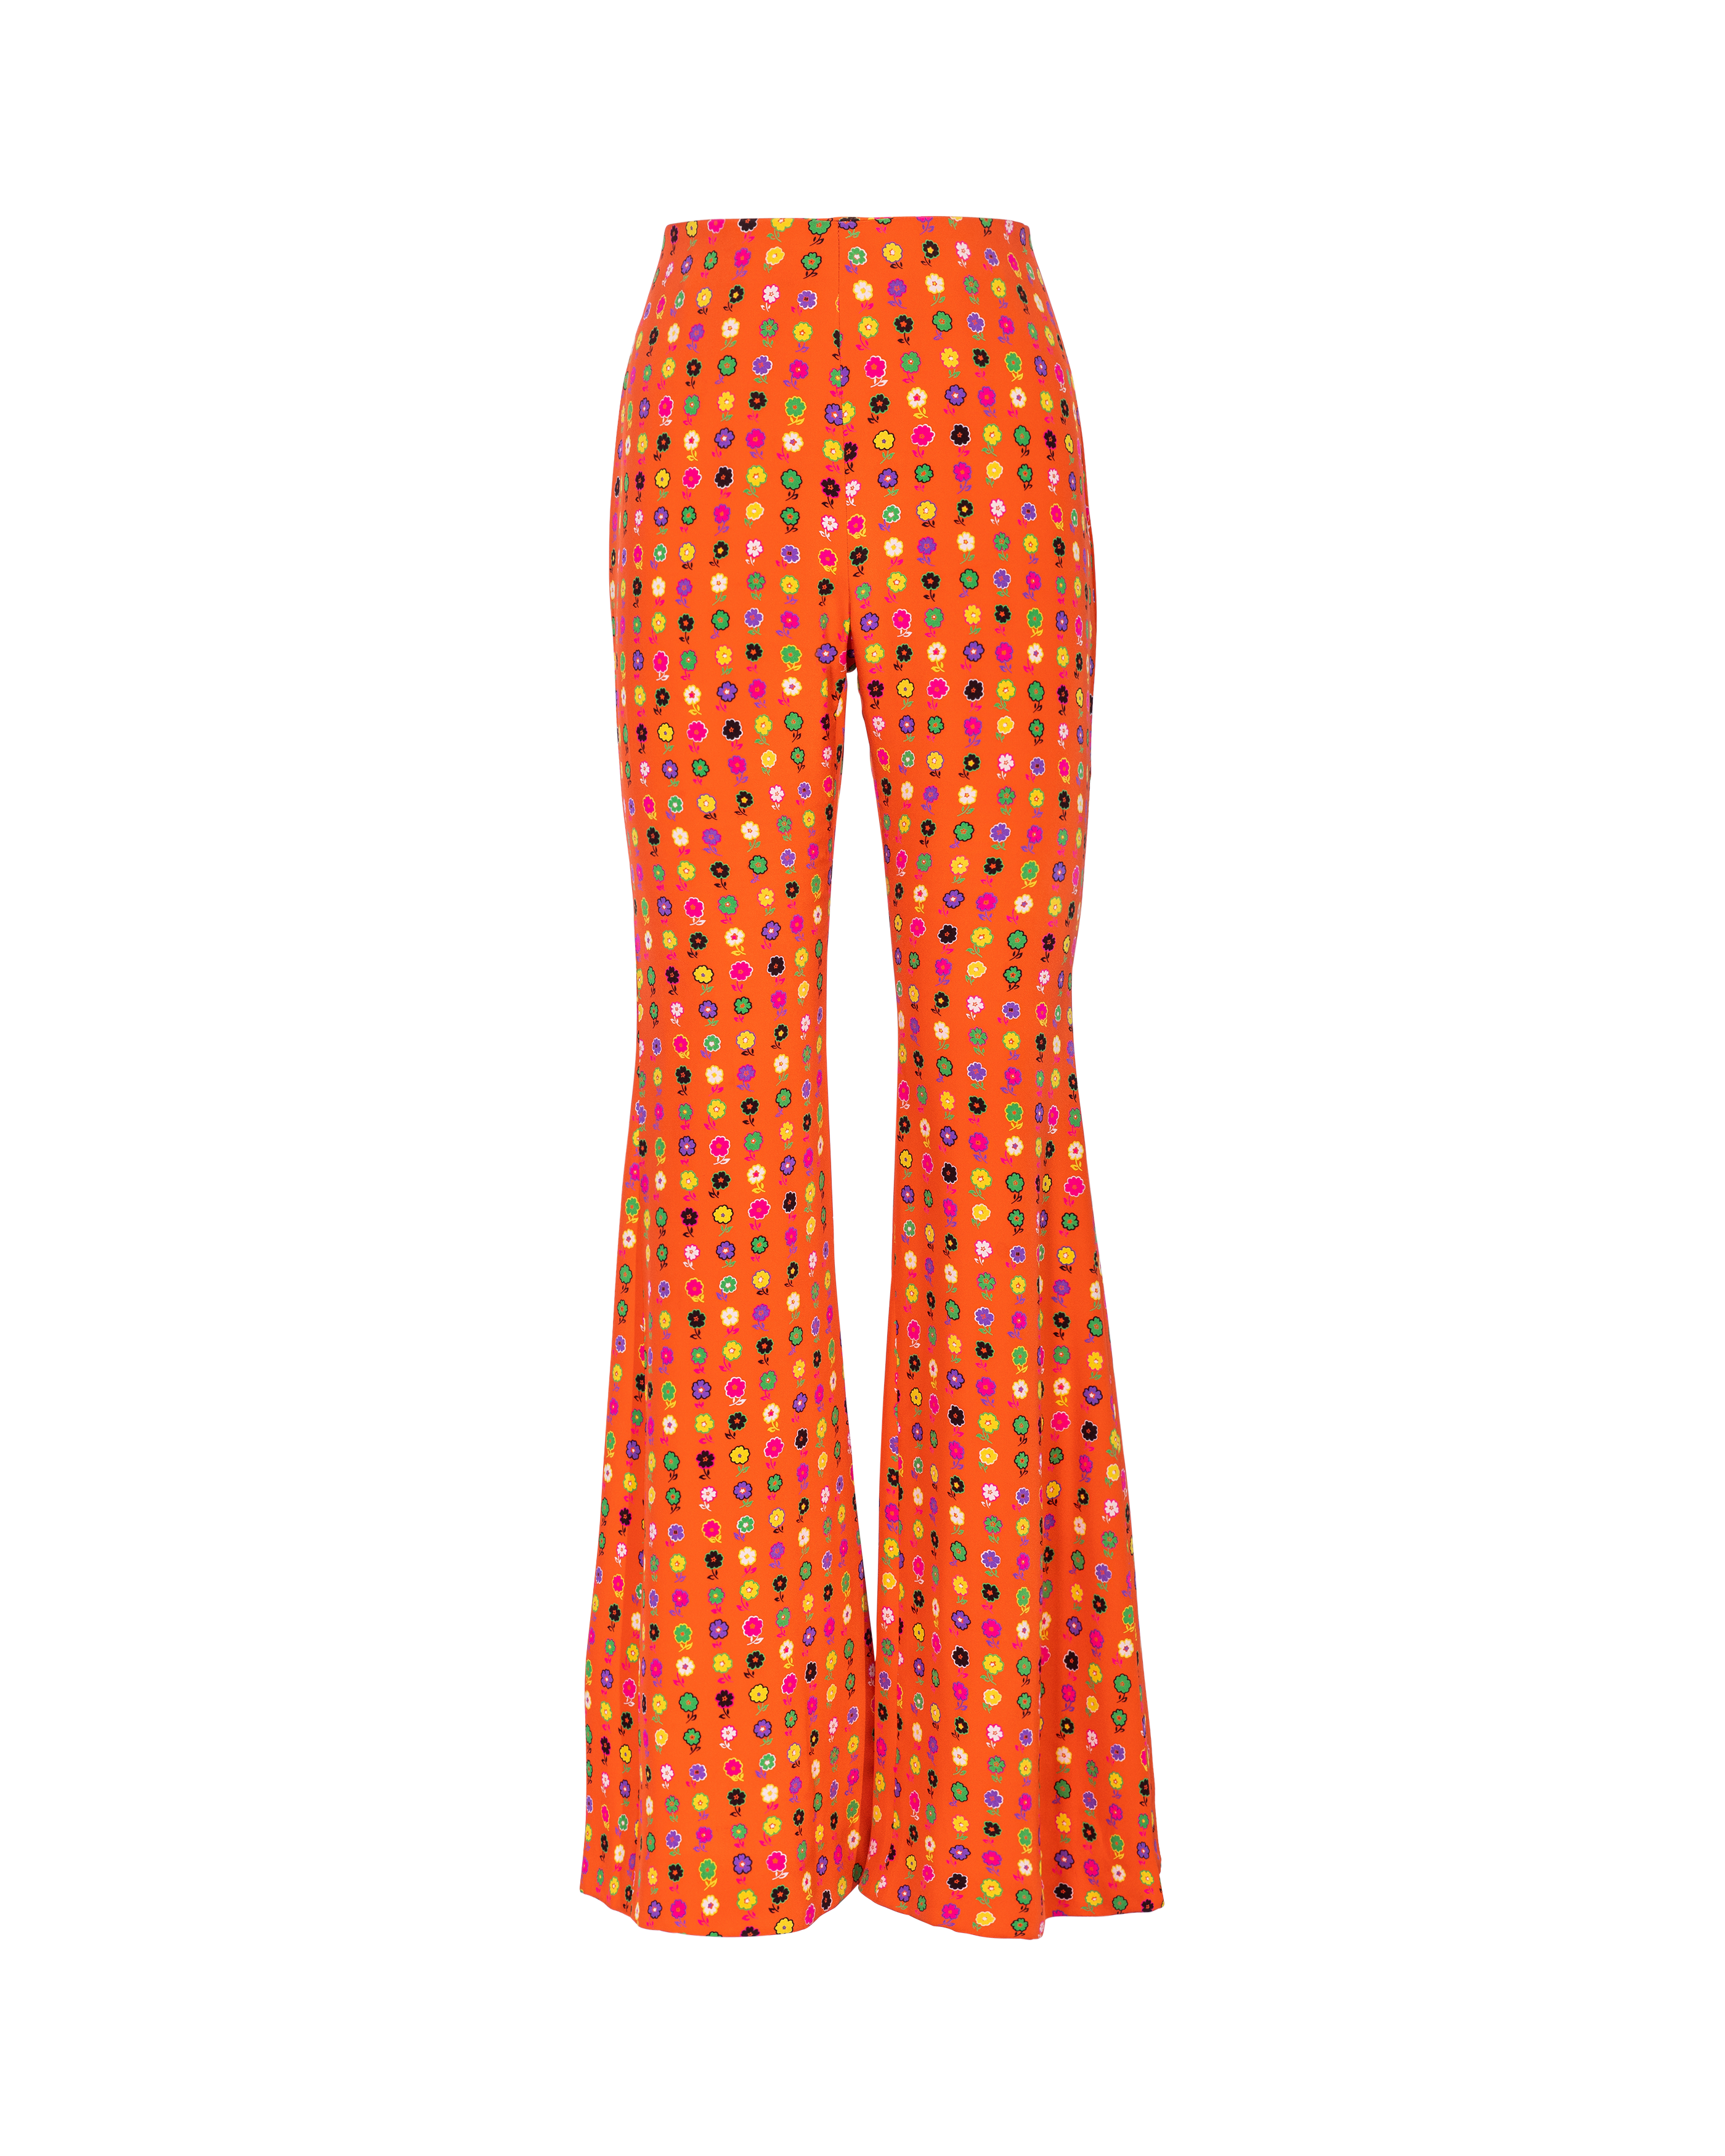 S/S 1993 Orange Floral Print Flare Trousers